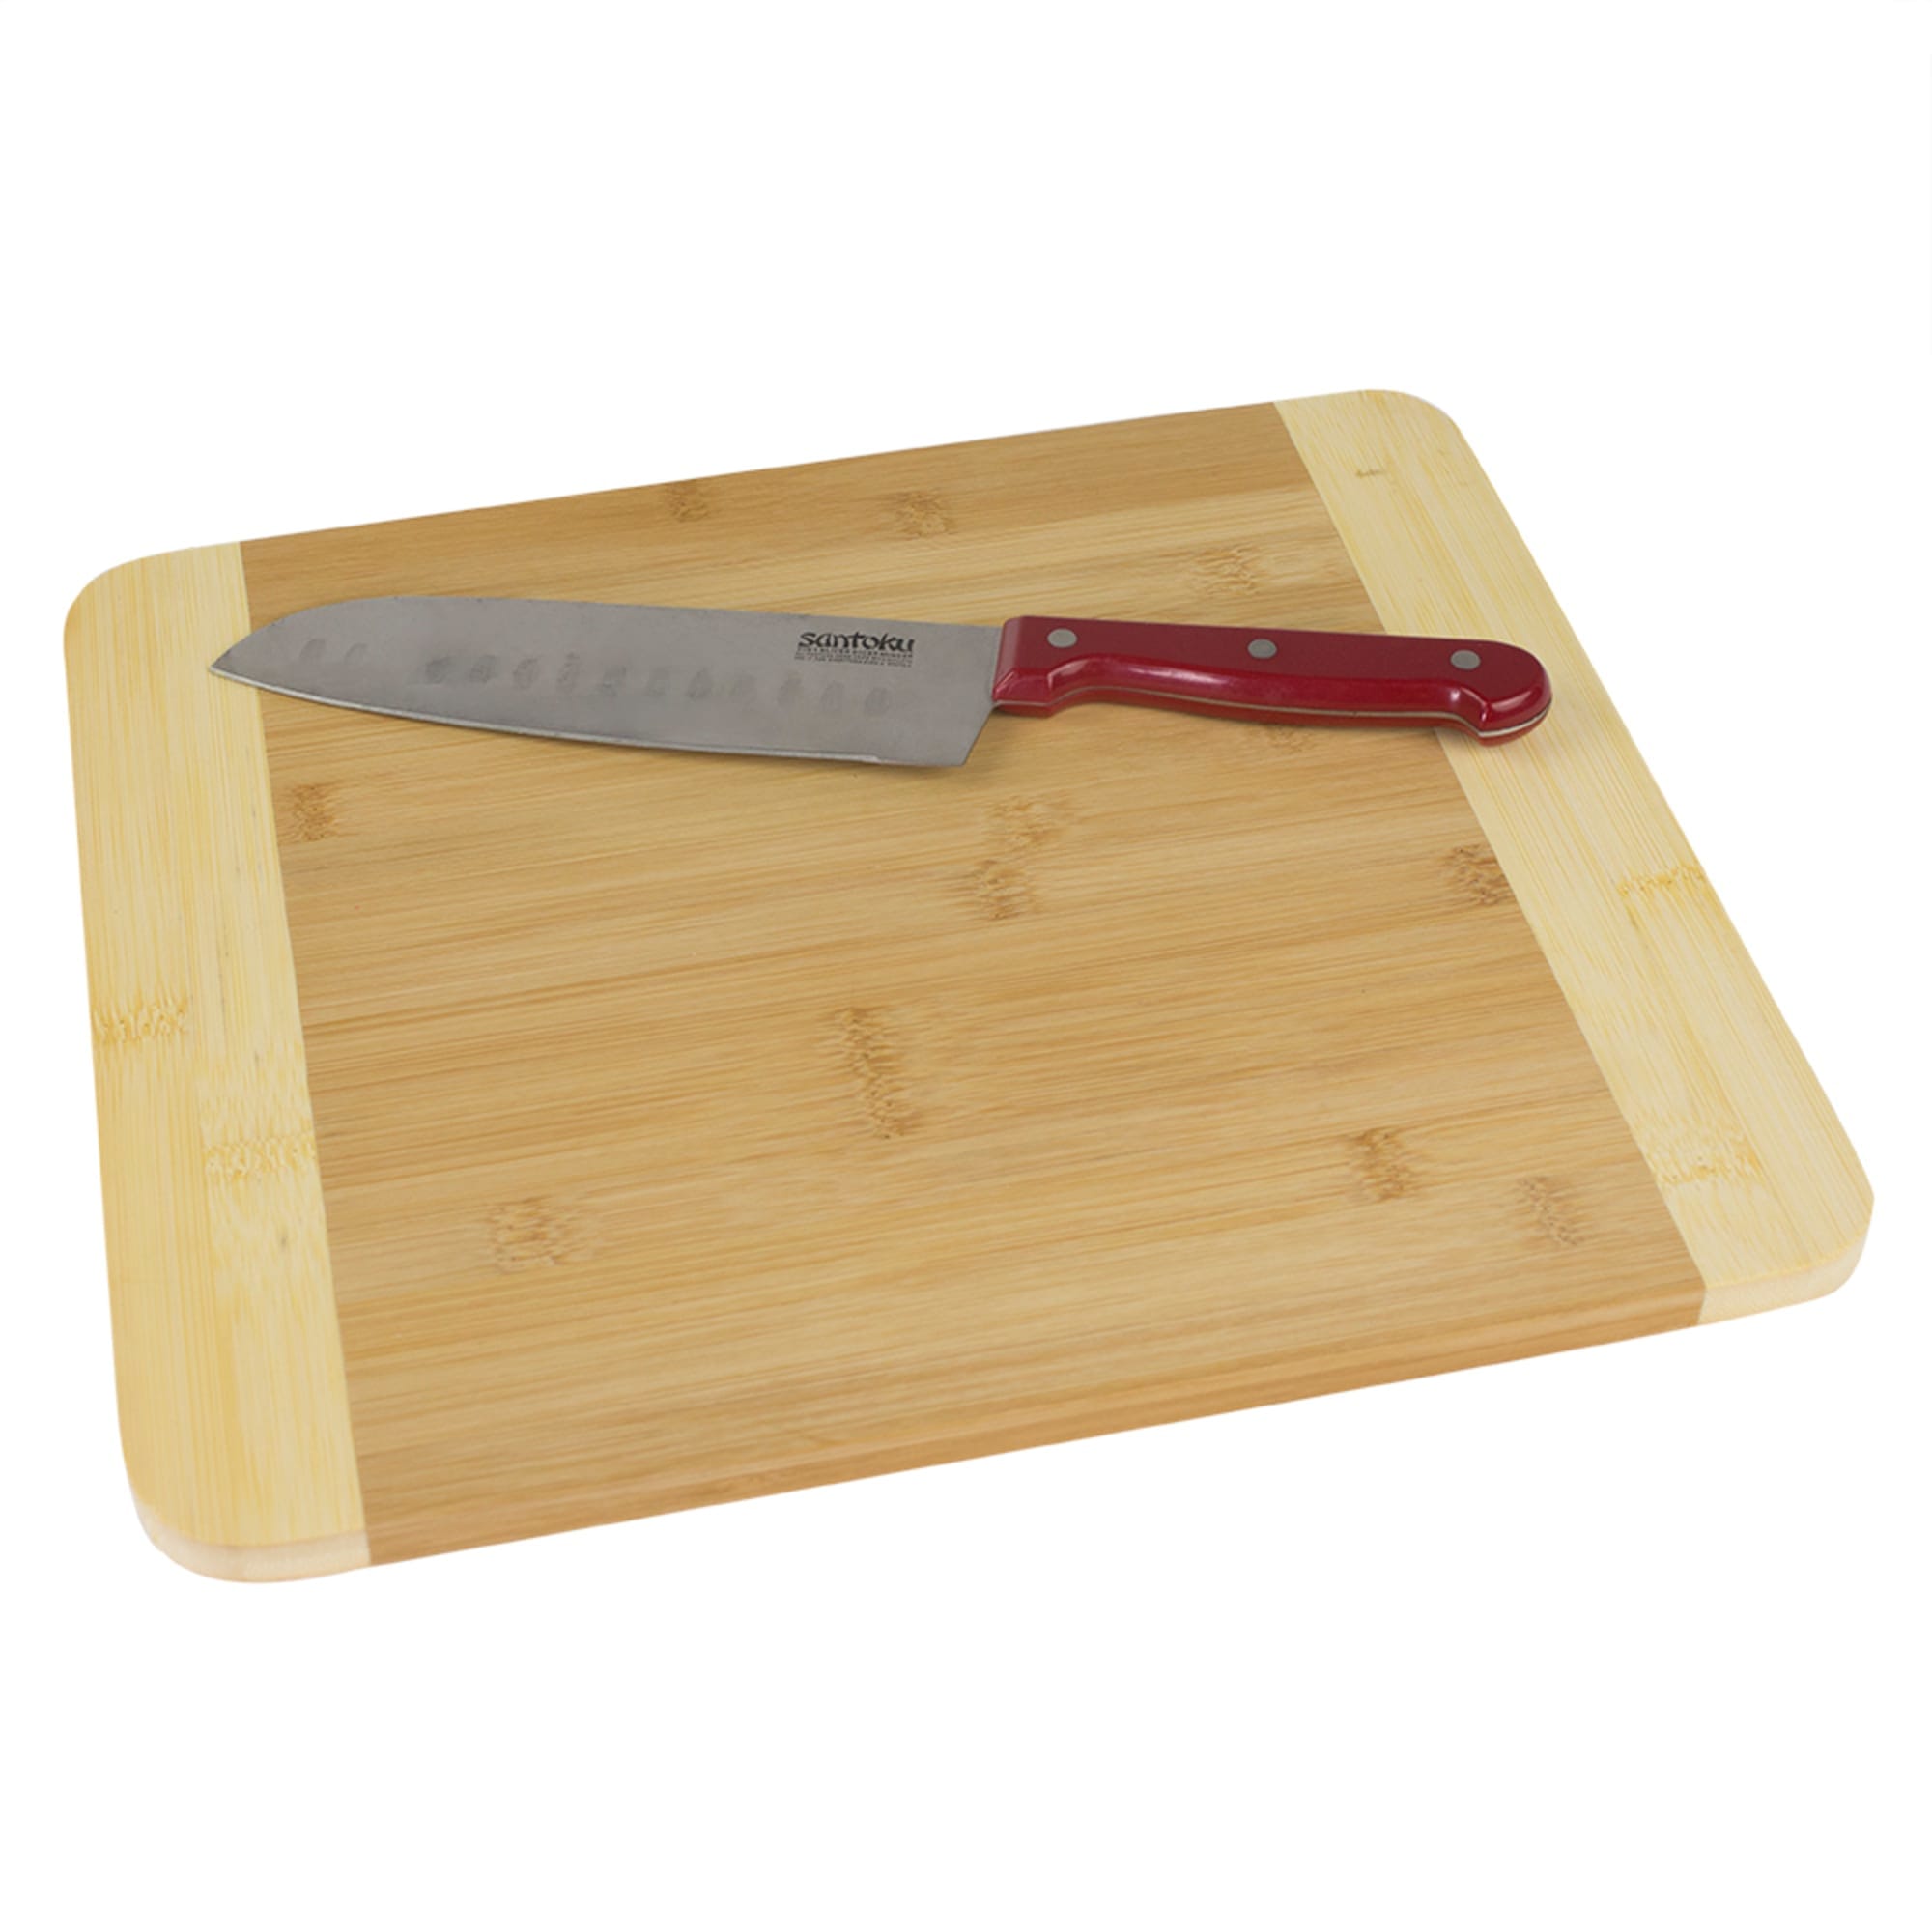 Home Basics Bamboo Cutting Board $5.00 EACH, CASE PACK OF 12